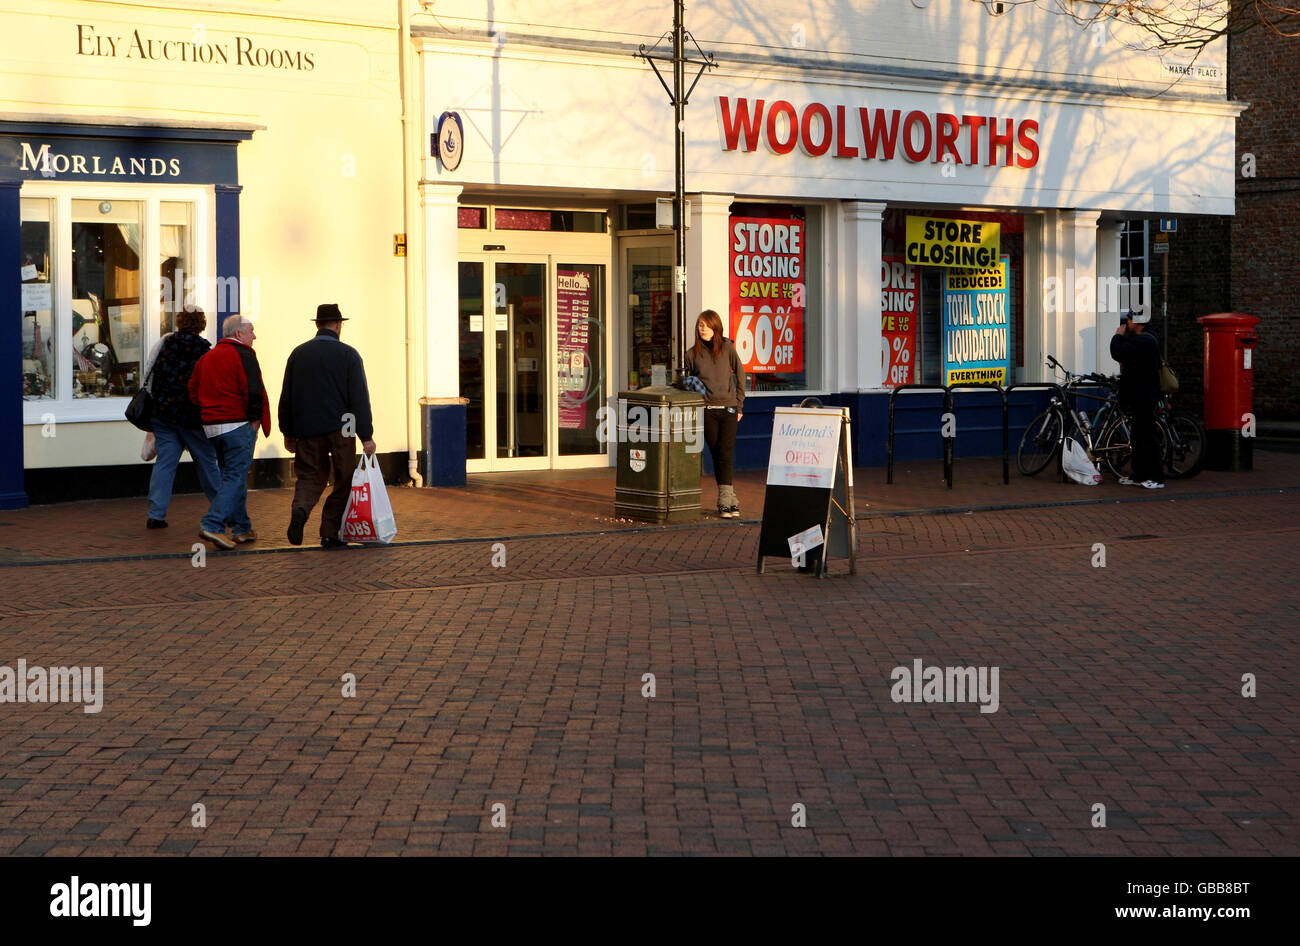 A general view of the Woolworths Store, in Ely, Cambridgeshire. 5 Market Pl, Ely, CB7 4NU. Stock Photo